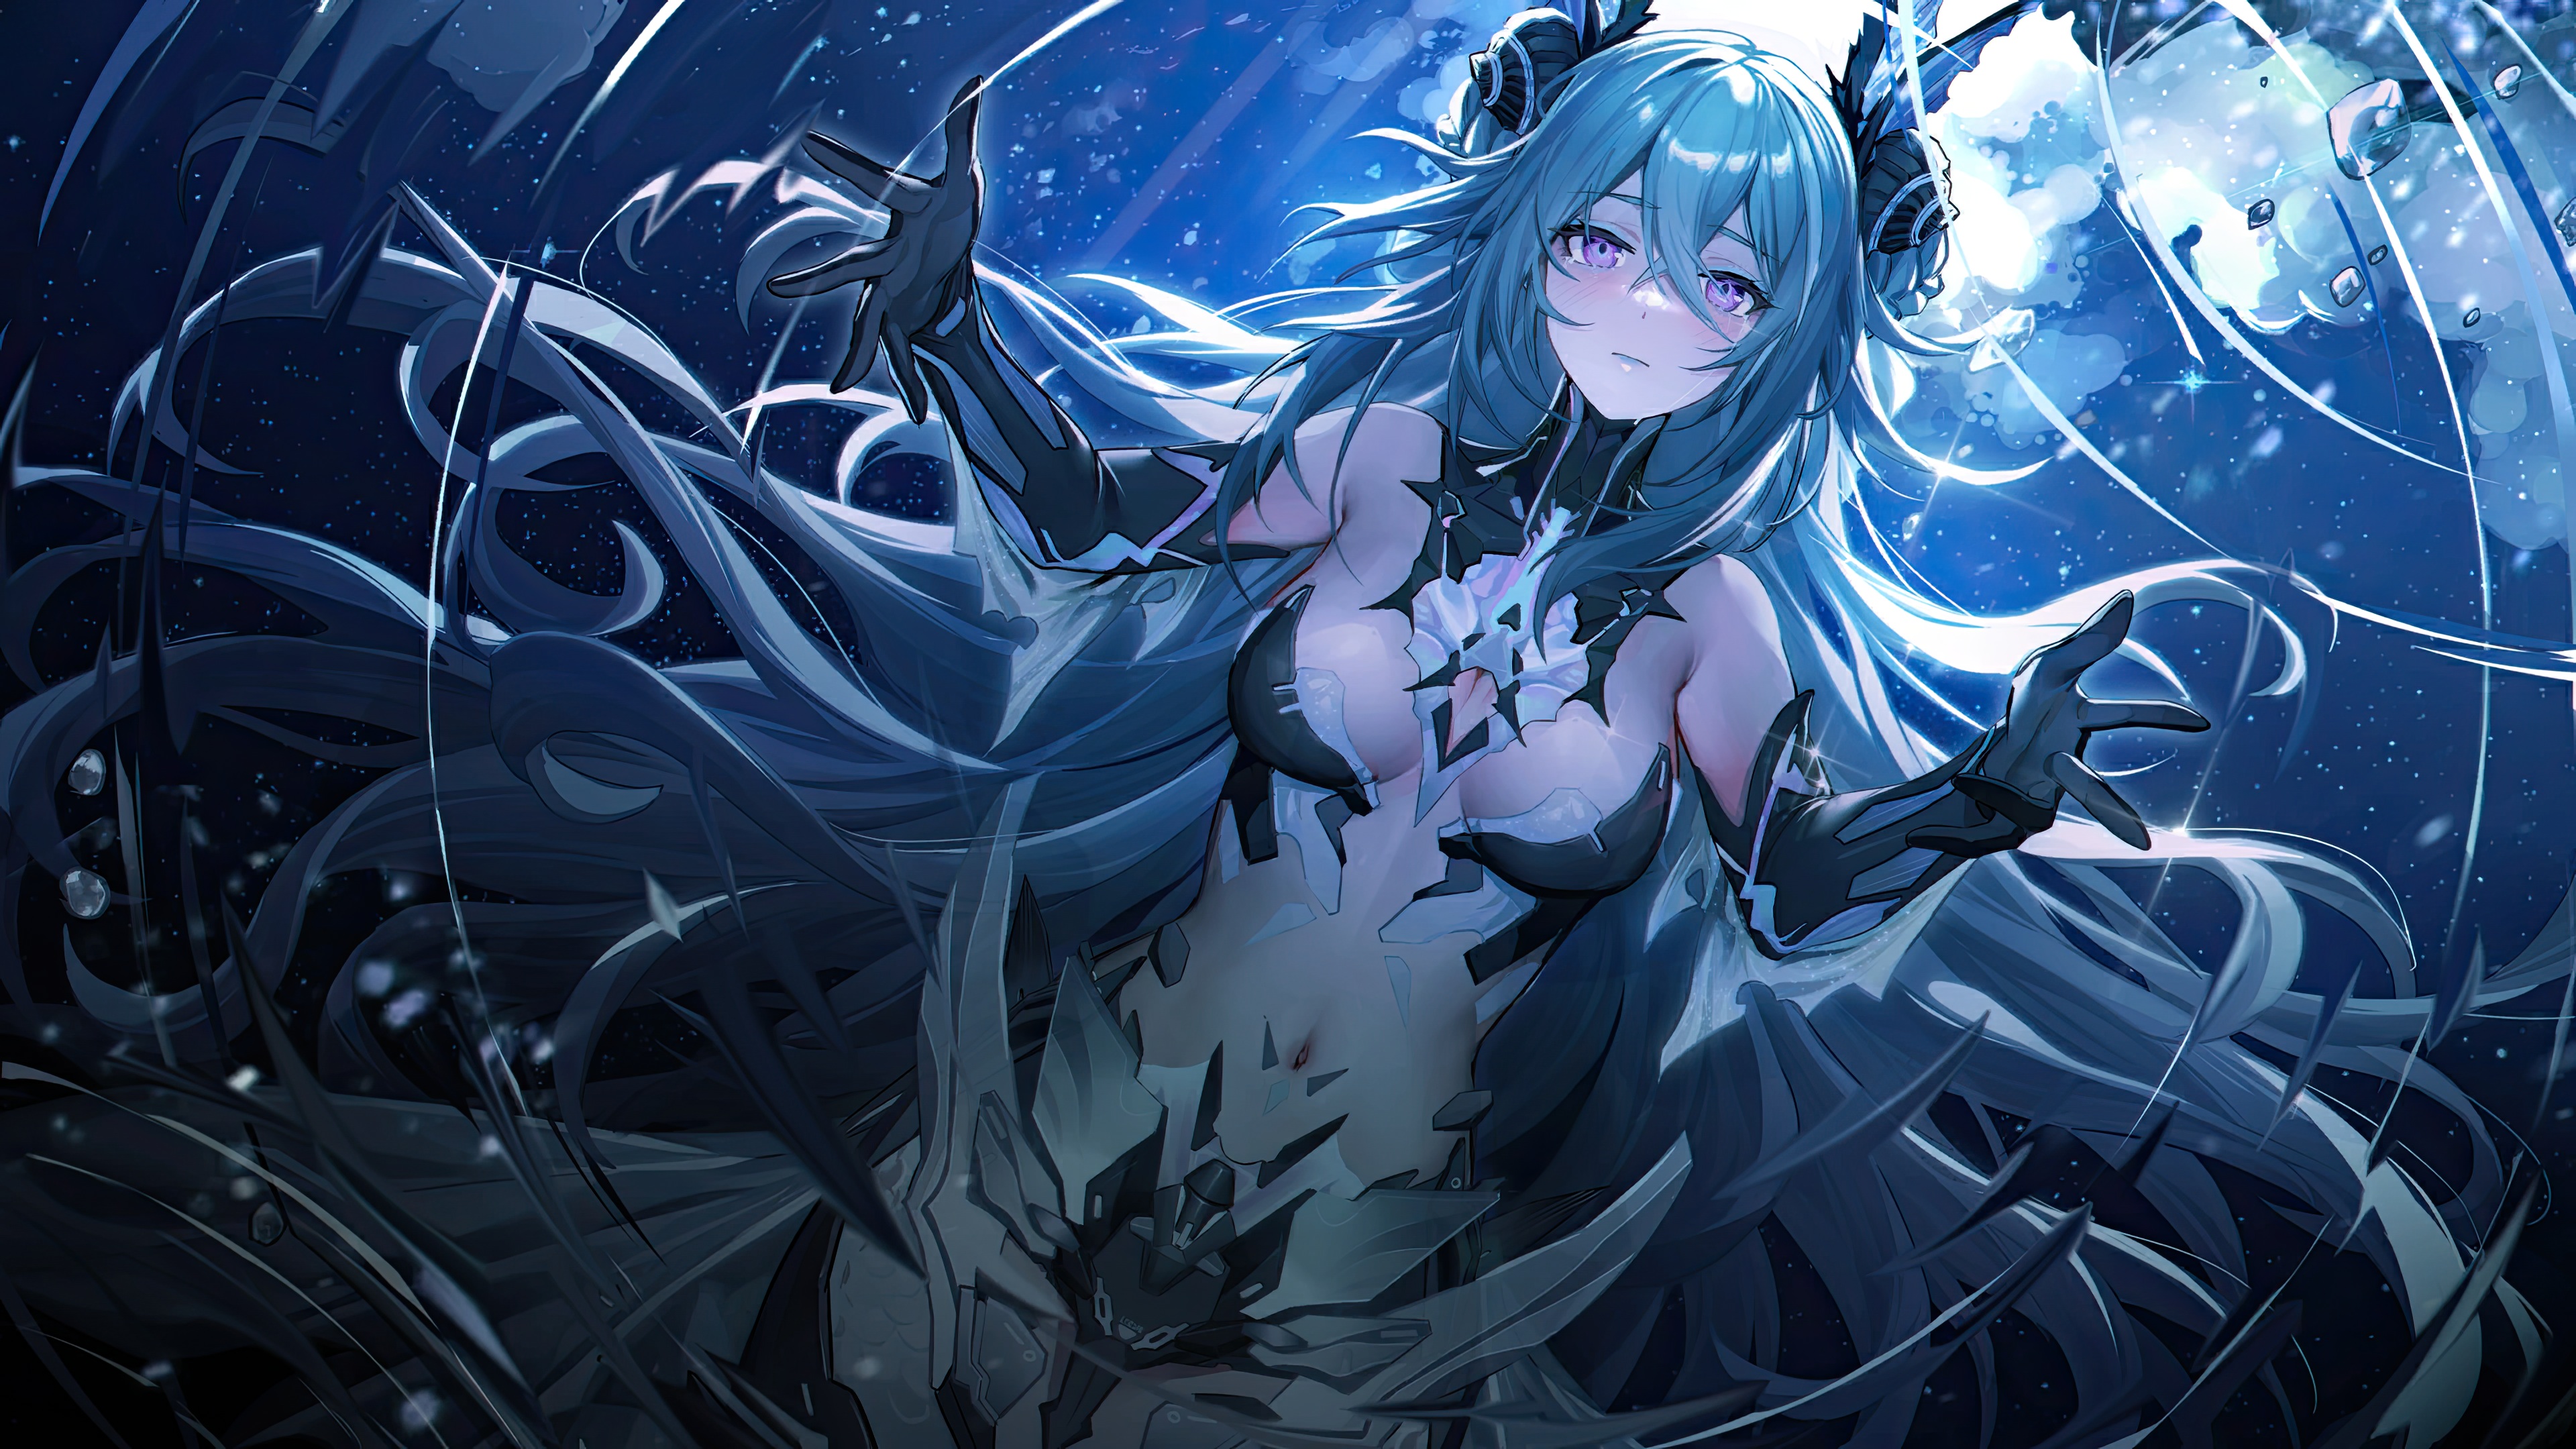 Anime 3840x2160 anime anime girls Punishing: Gray Raven Lamia (Punishing: Gray Raven) boobs looking at viewer long hair blue hair purple eyes tears blushing crying ripples water sky clouds belly button arms reaching water drops